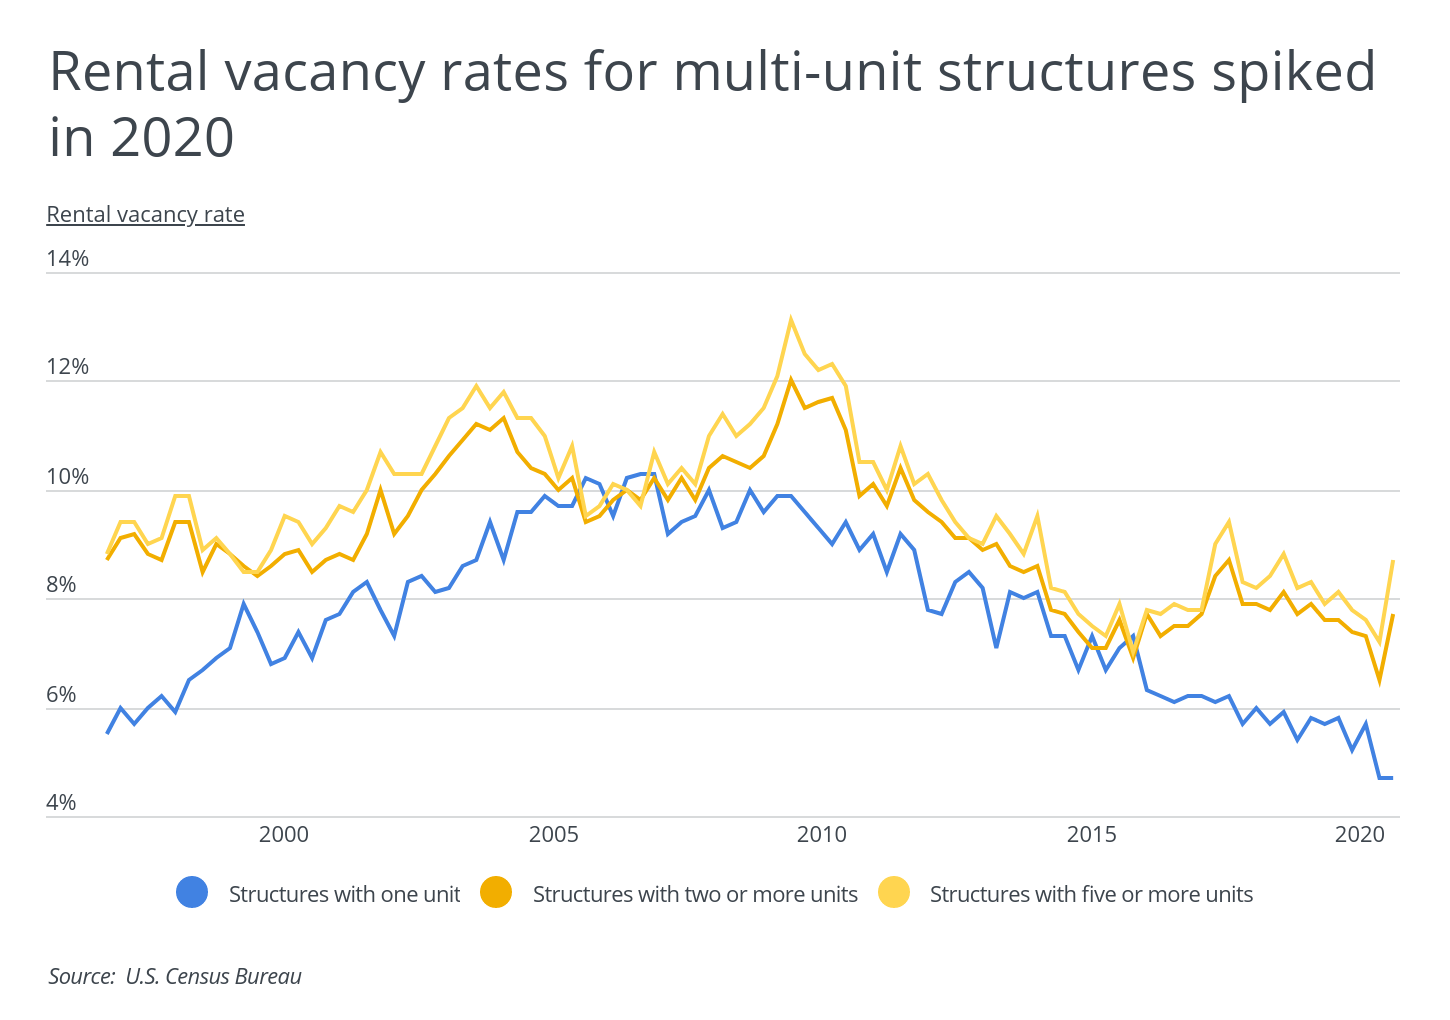 Rental vacancy rates for multi-unit structures spiked in 2020